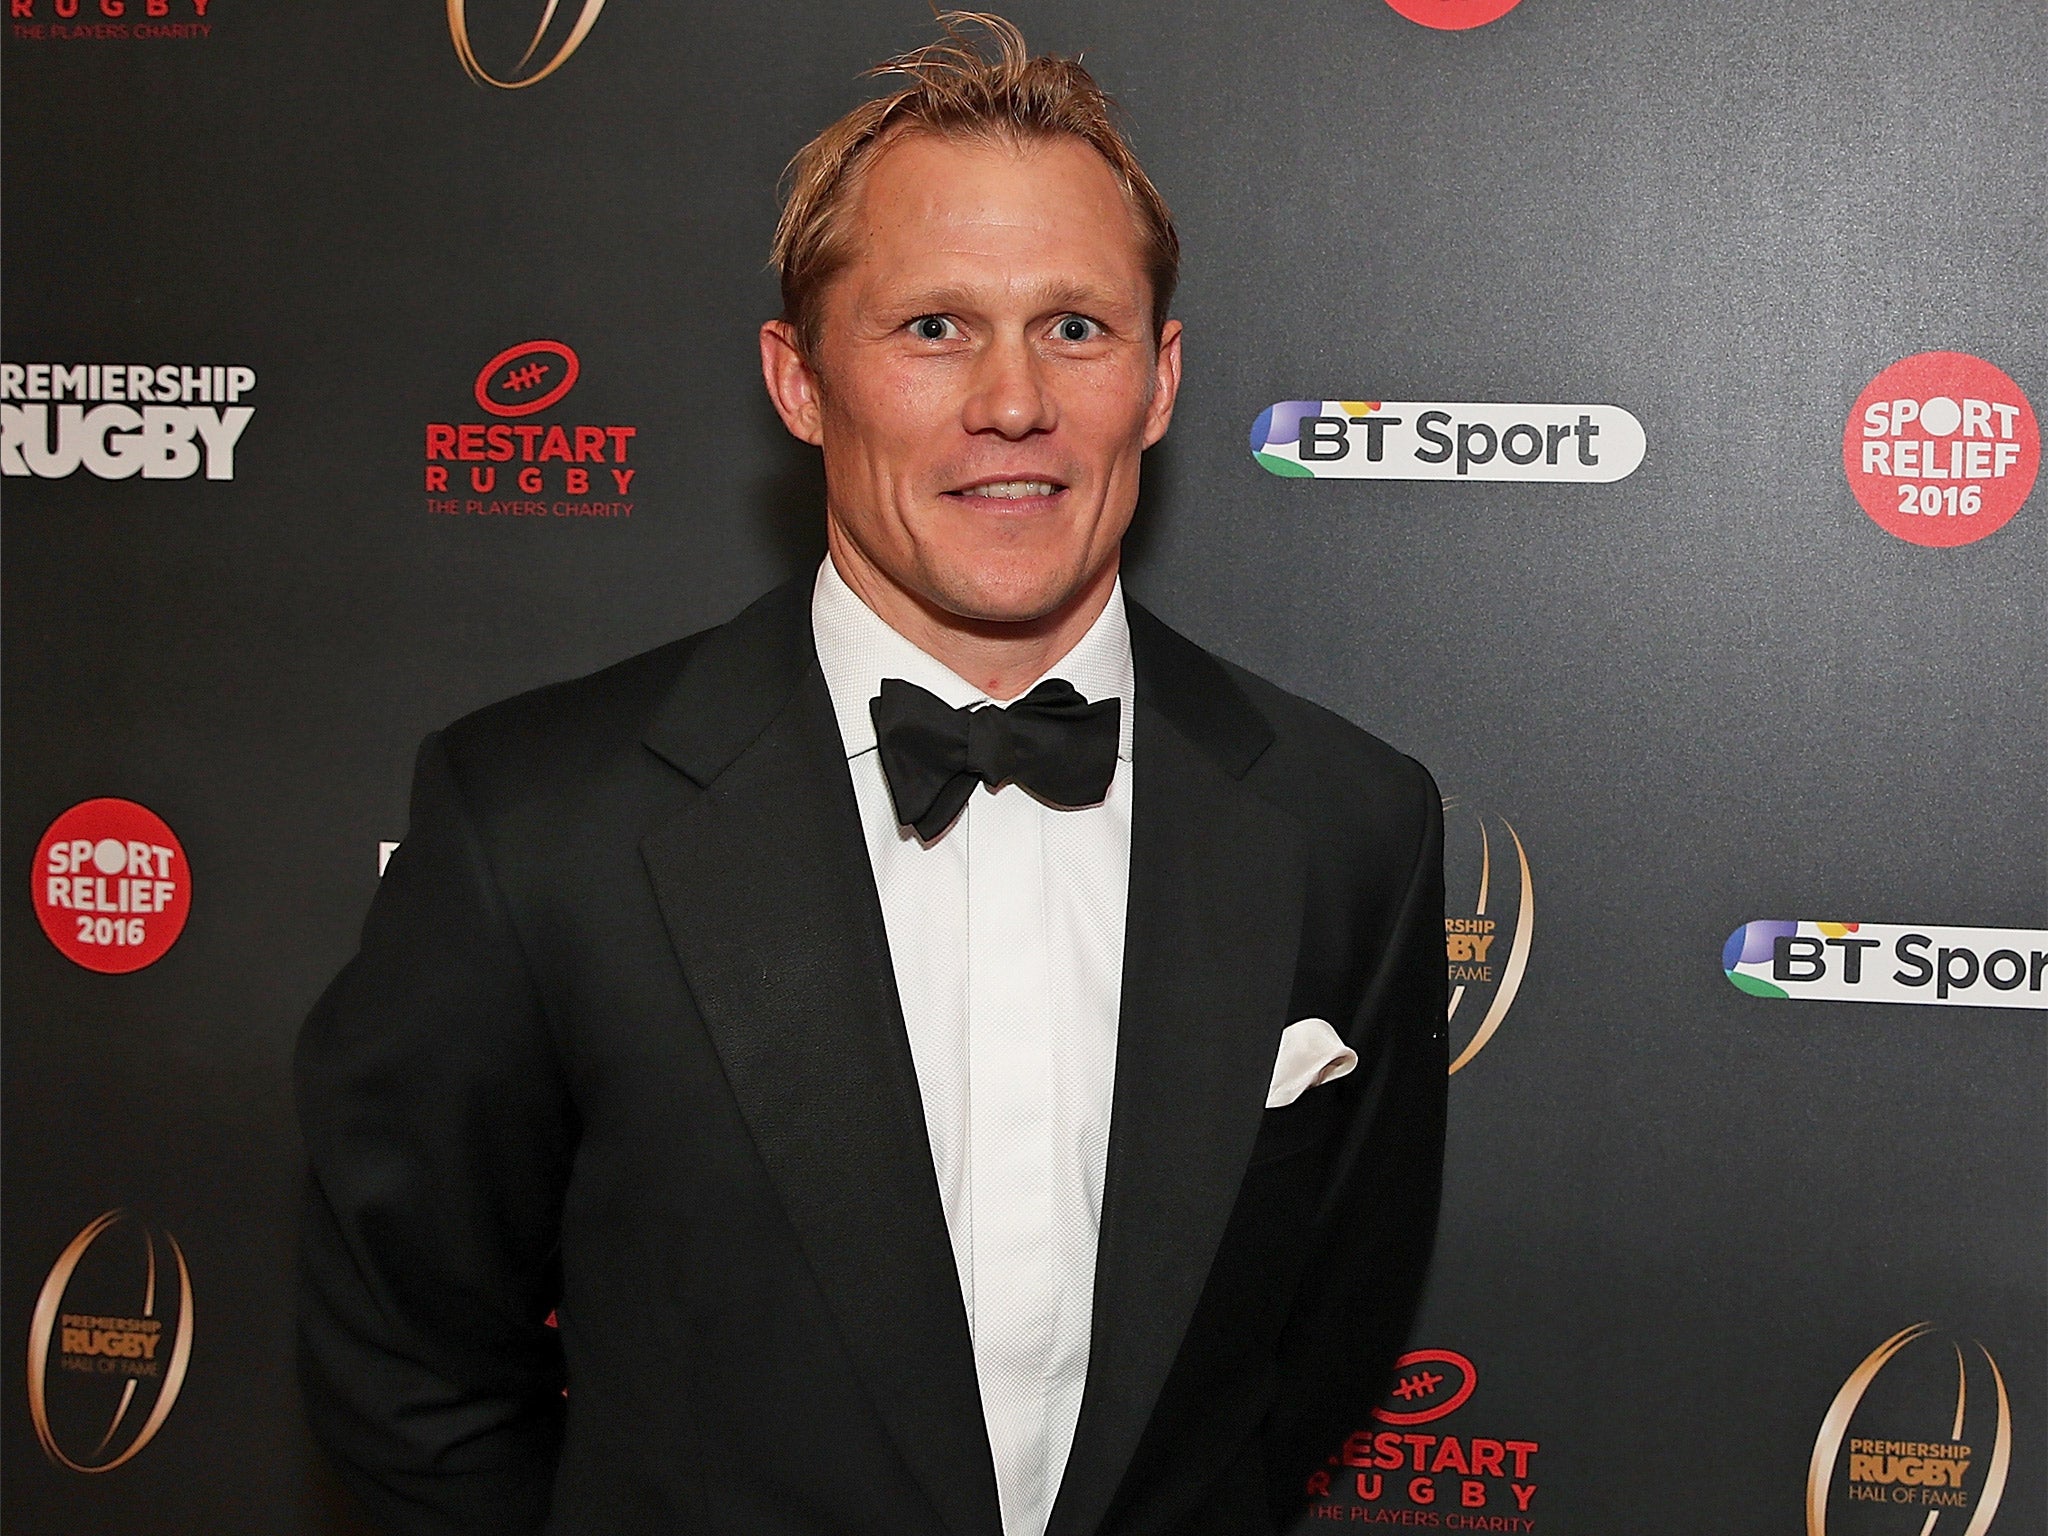 Josh Lewsey has announced he will be leaving his job as head of rugby at the Welsh Rugby Union